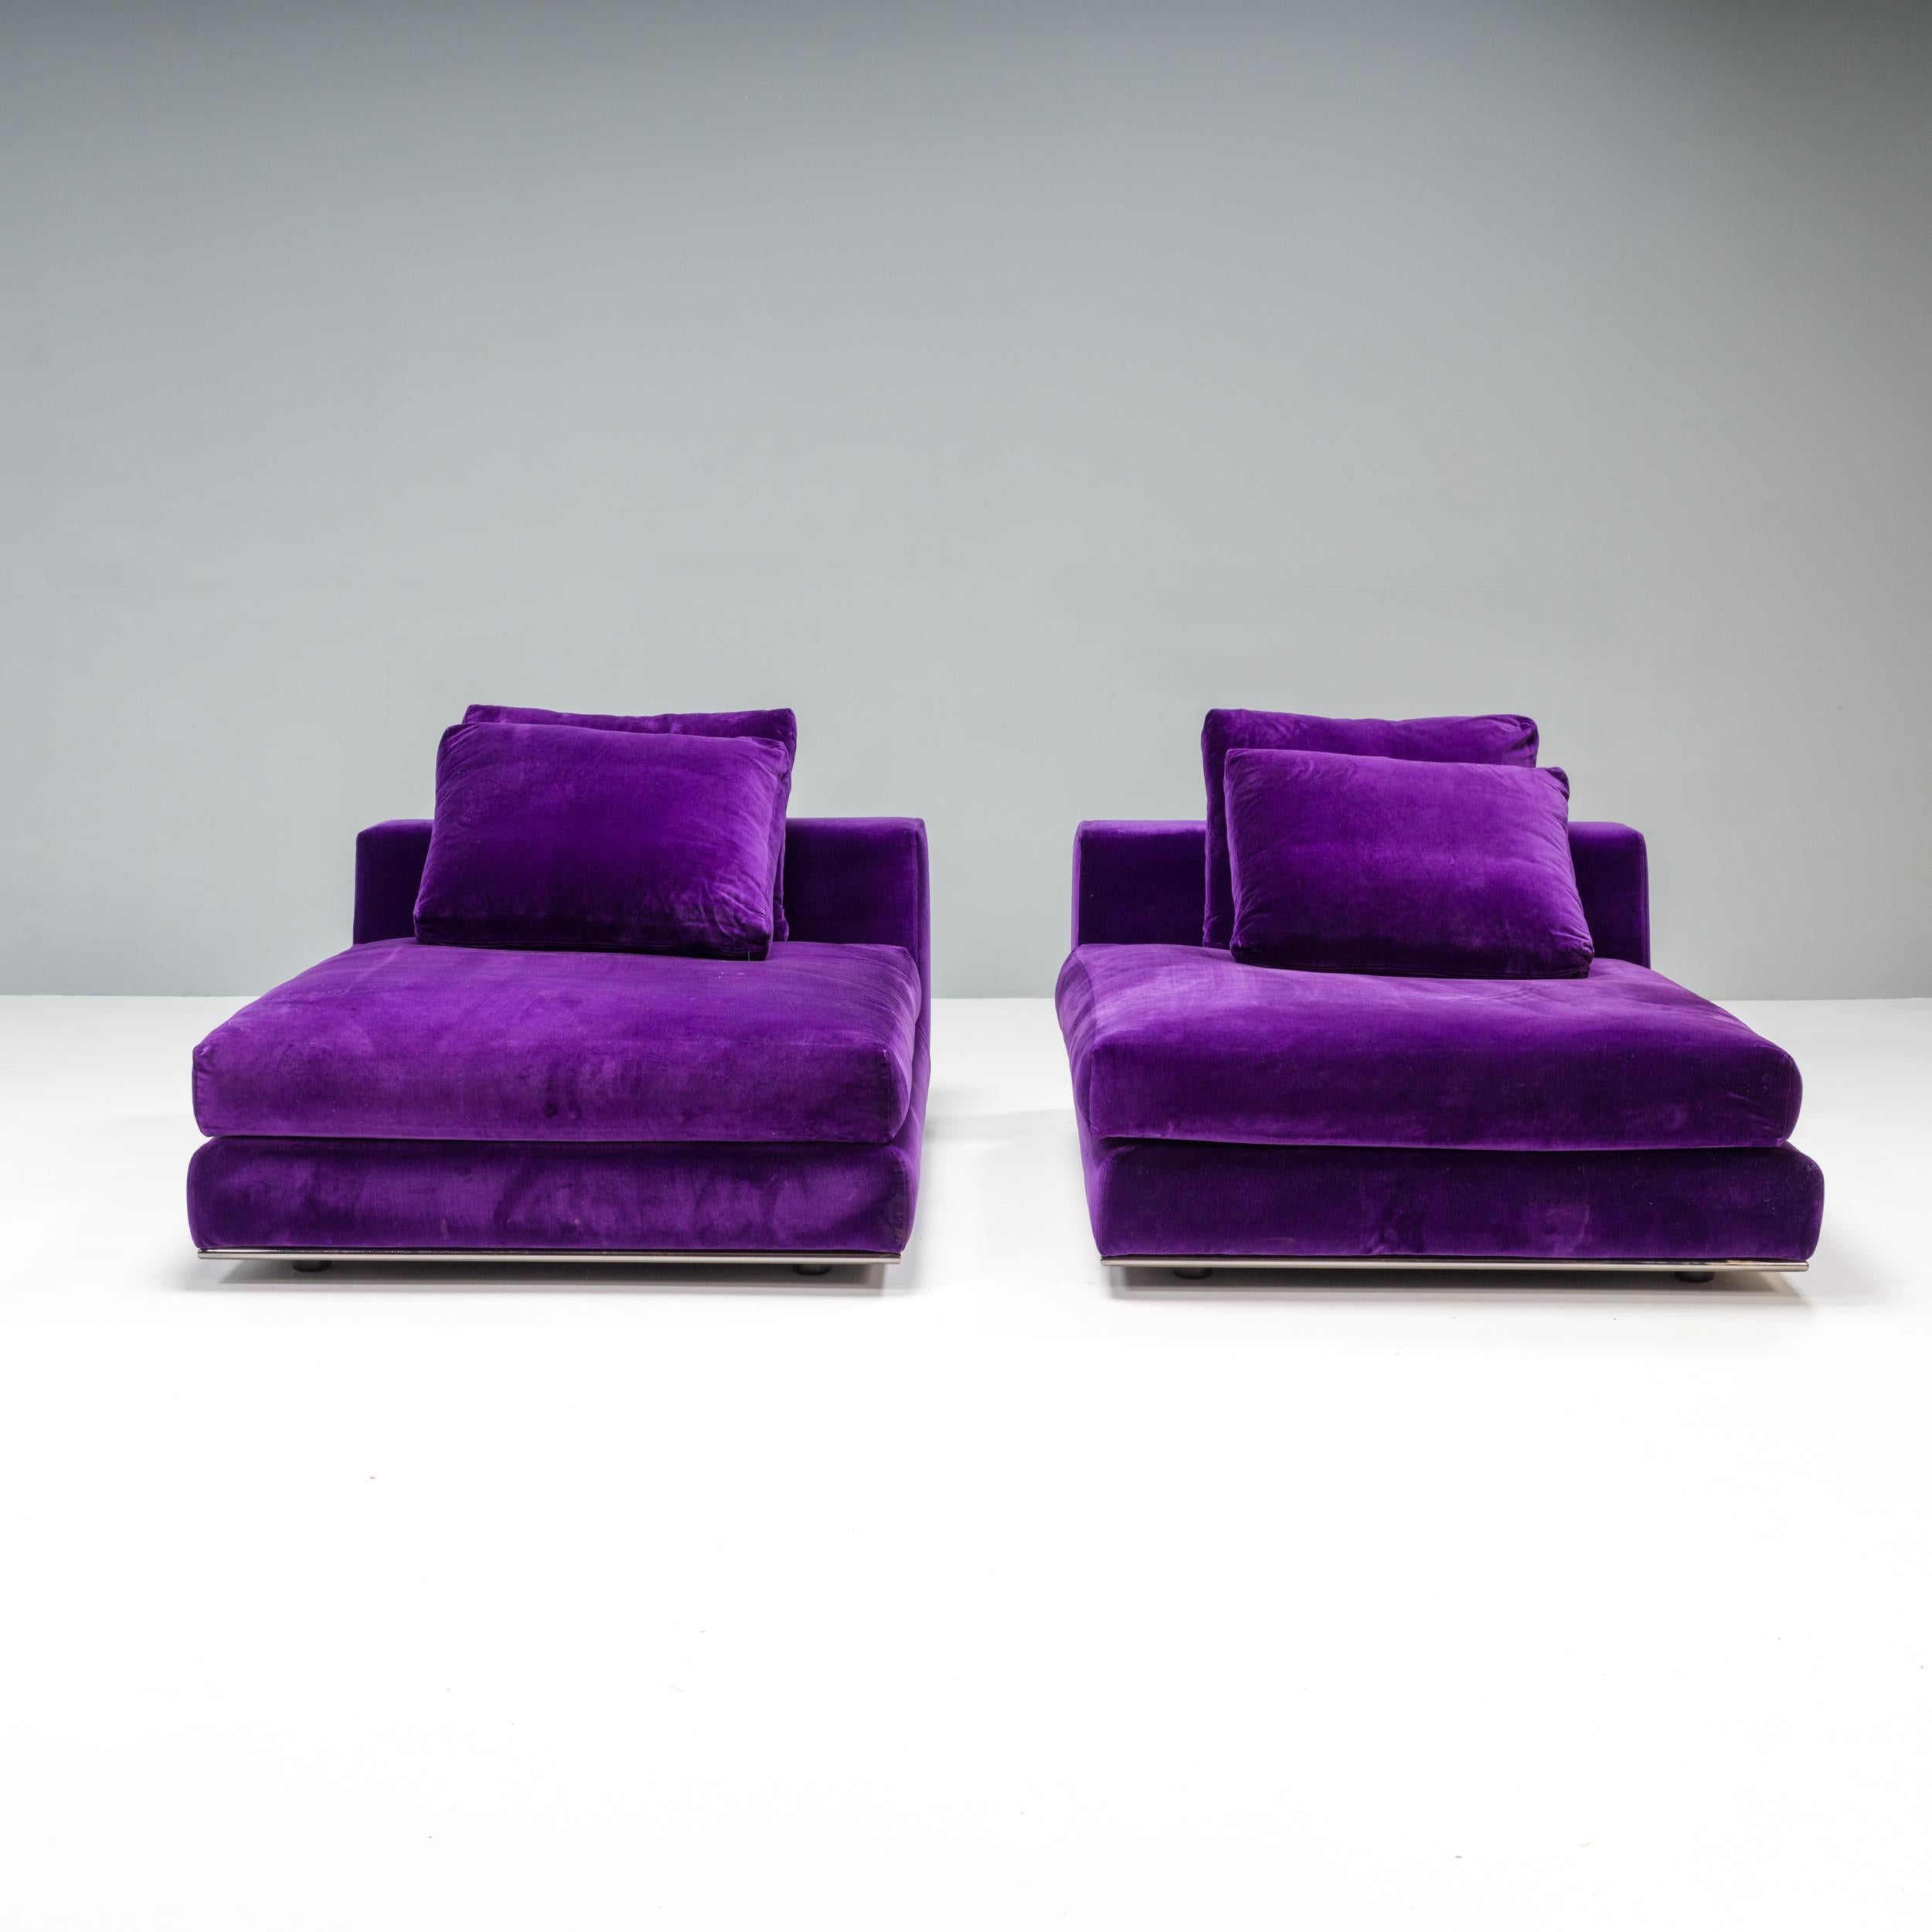 Designed by Minotti, these day beds allow for luxurious lounging. With generous proportions, the sofas sit on a slimline chrome frame which gives the impression they are floating slightly above the ground.

Fully upholstered in a bold purple velvet,